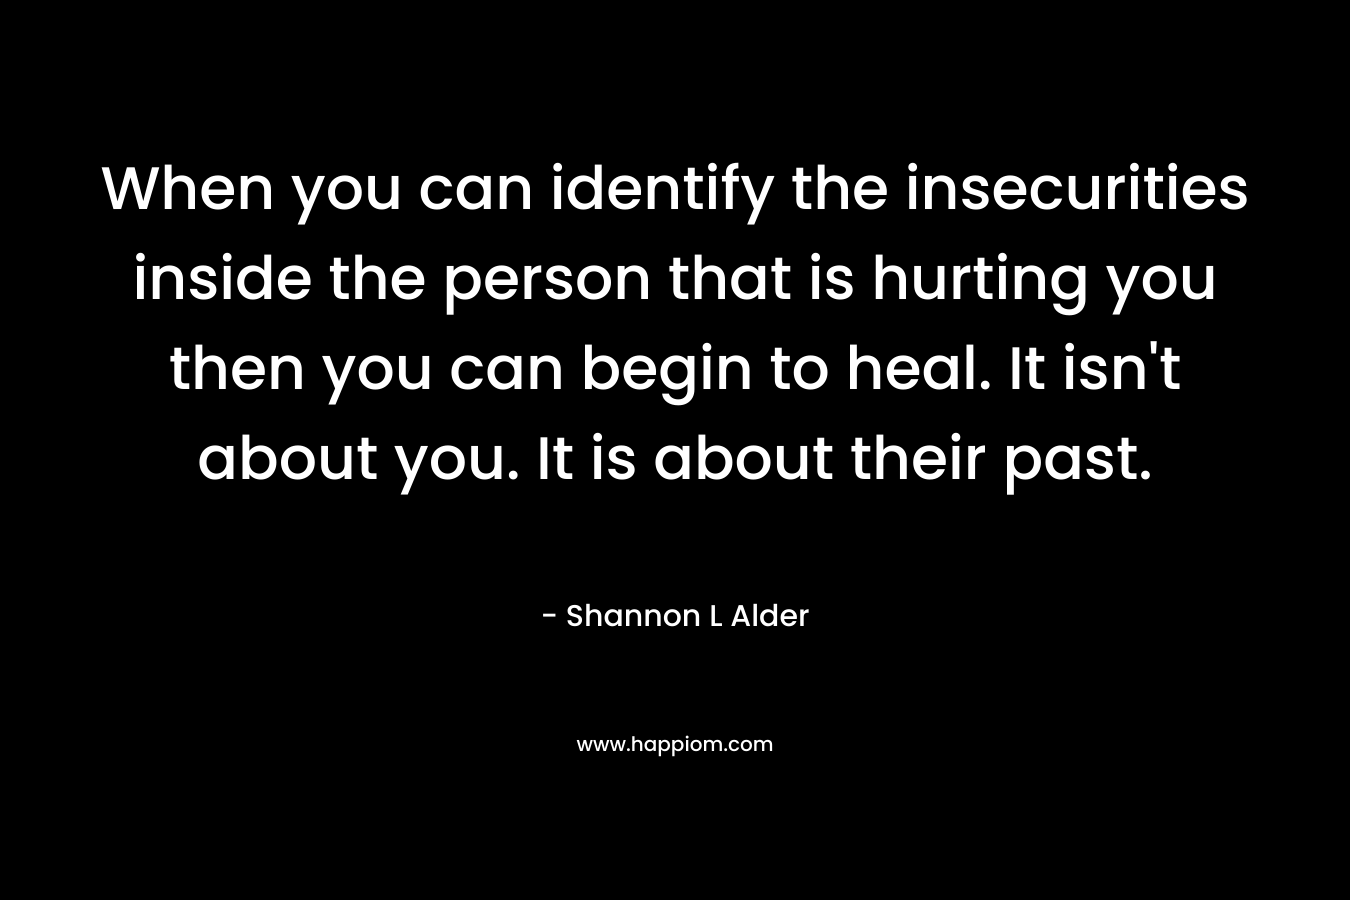 When you can identify the insecurities inside the person that is hurting you then you can begin to heal. It isn't about you. It is about their past.